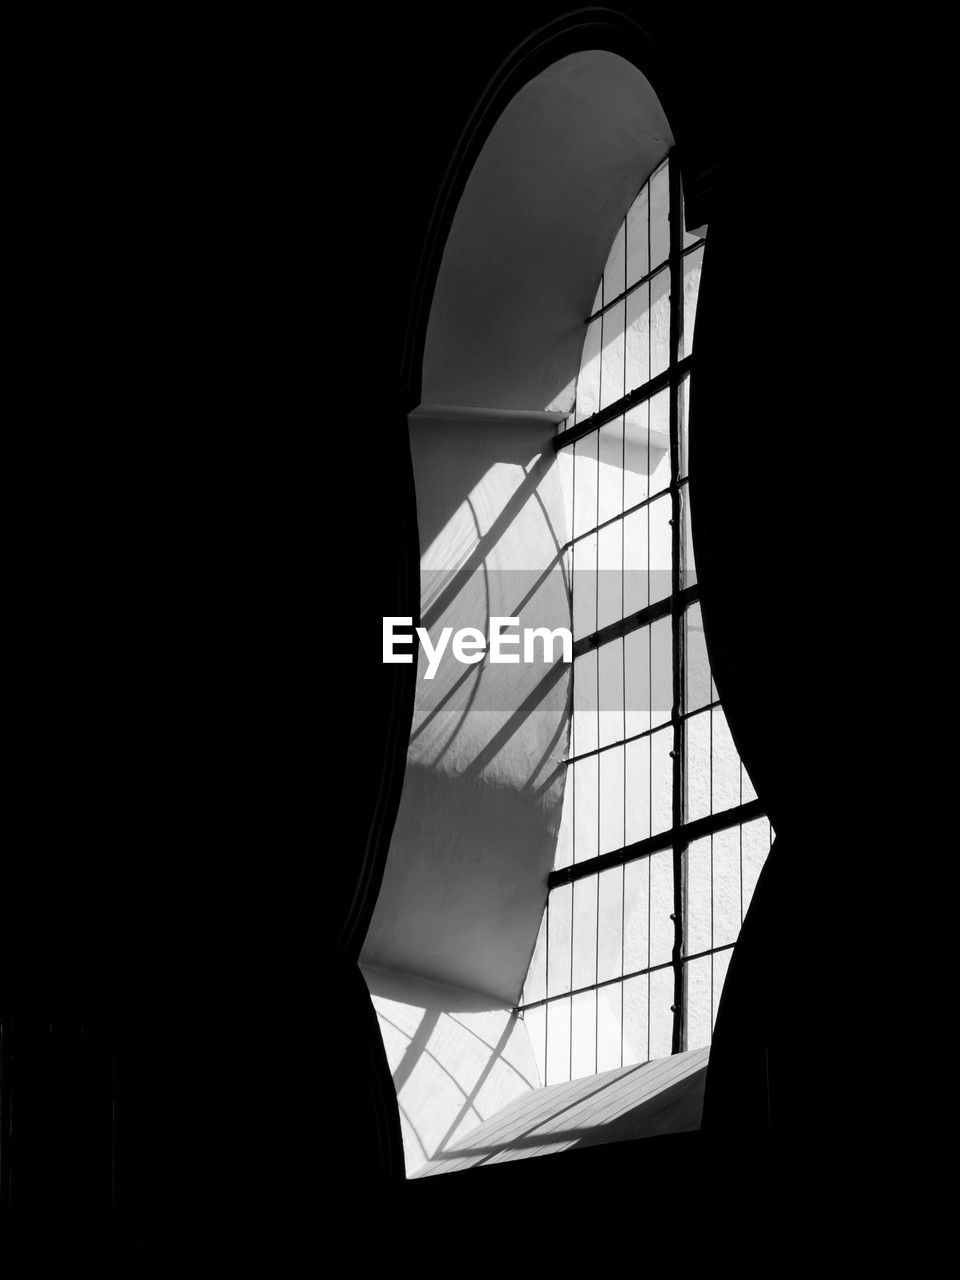 black and white, black, architecture, window, built structure, indoors, silhouette, monochrome photography, monochrome, light, darkness, white, low angle view, no people, glass, sky, copy space, nature, building, dark, sunlight, day